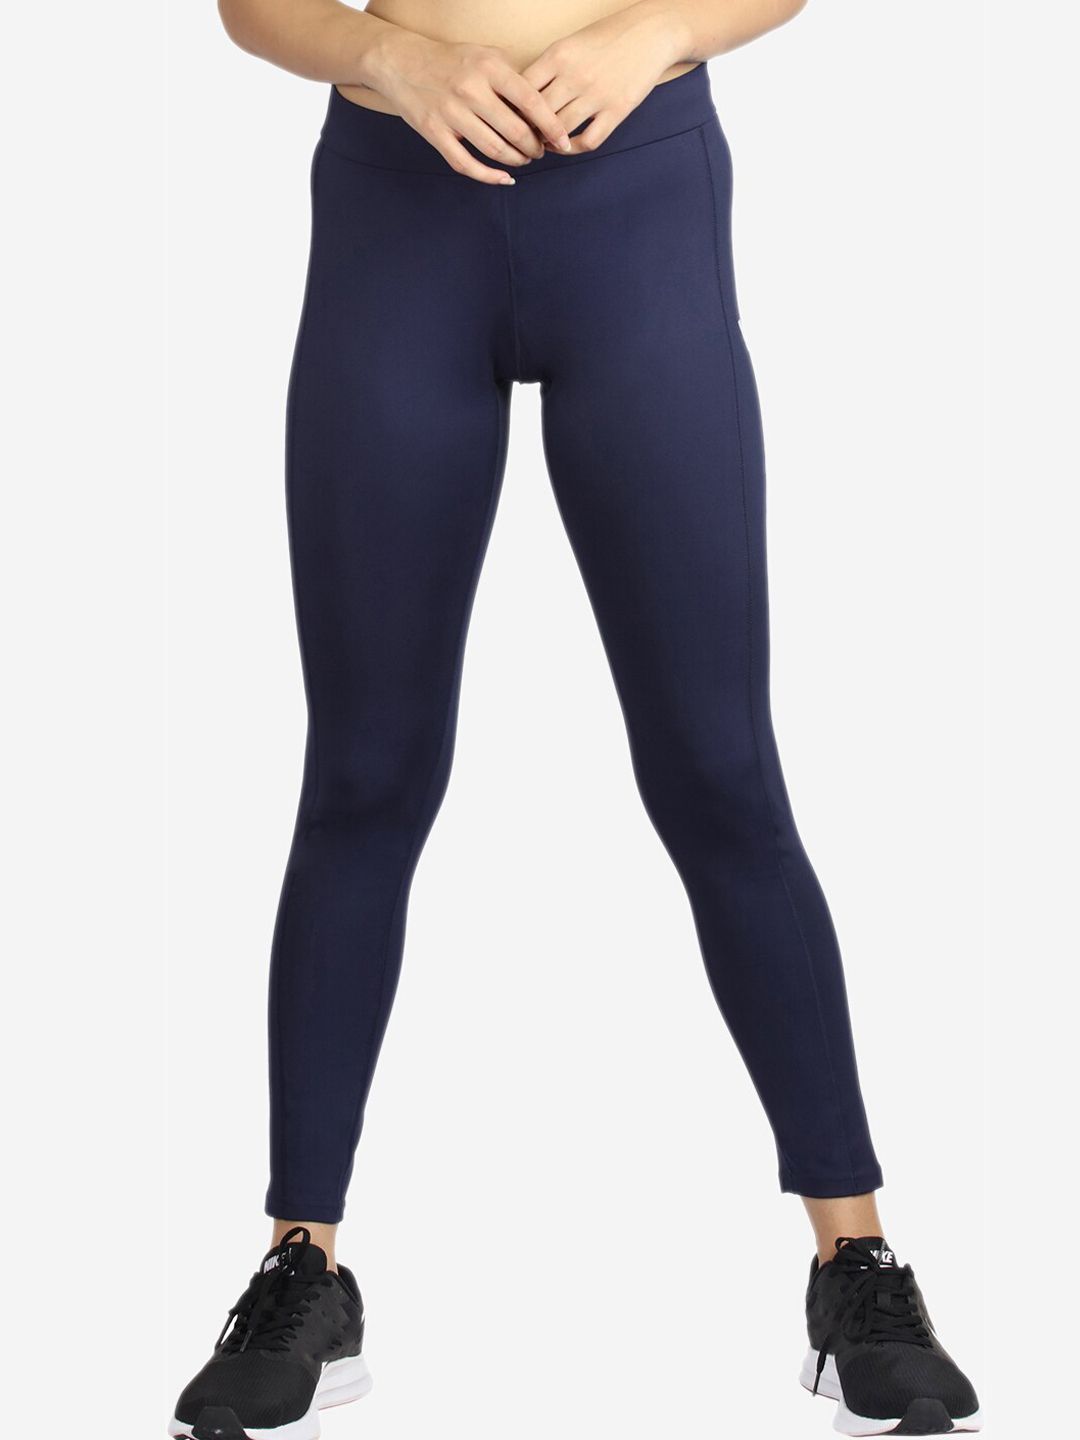 VELOZ Women Navy Blue Solid Hydro Dry Tights Price in India